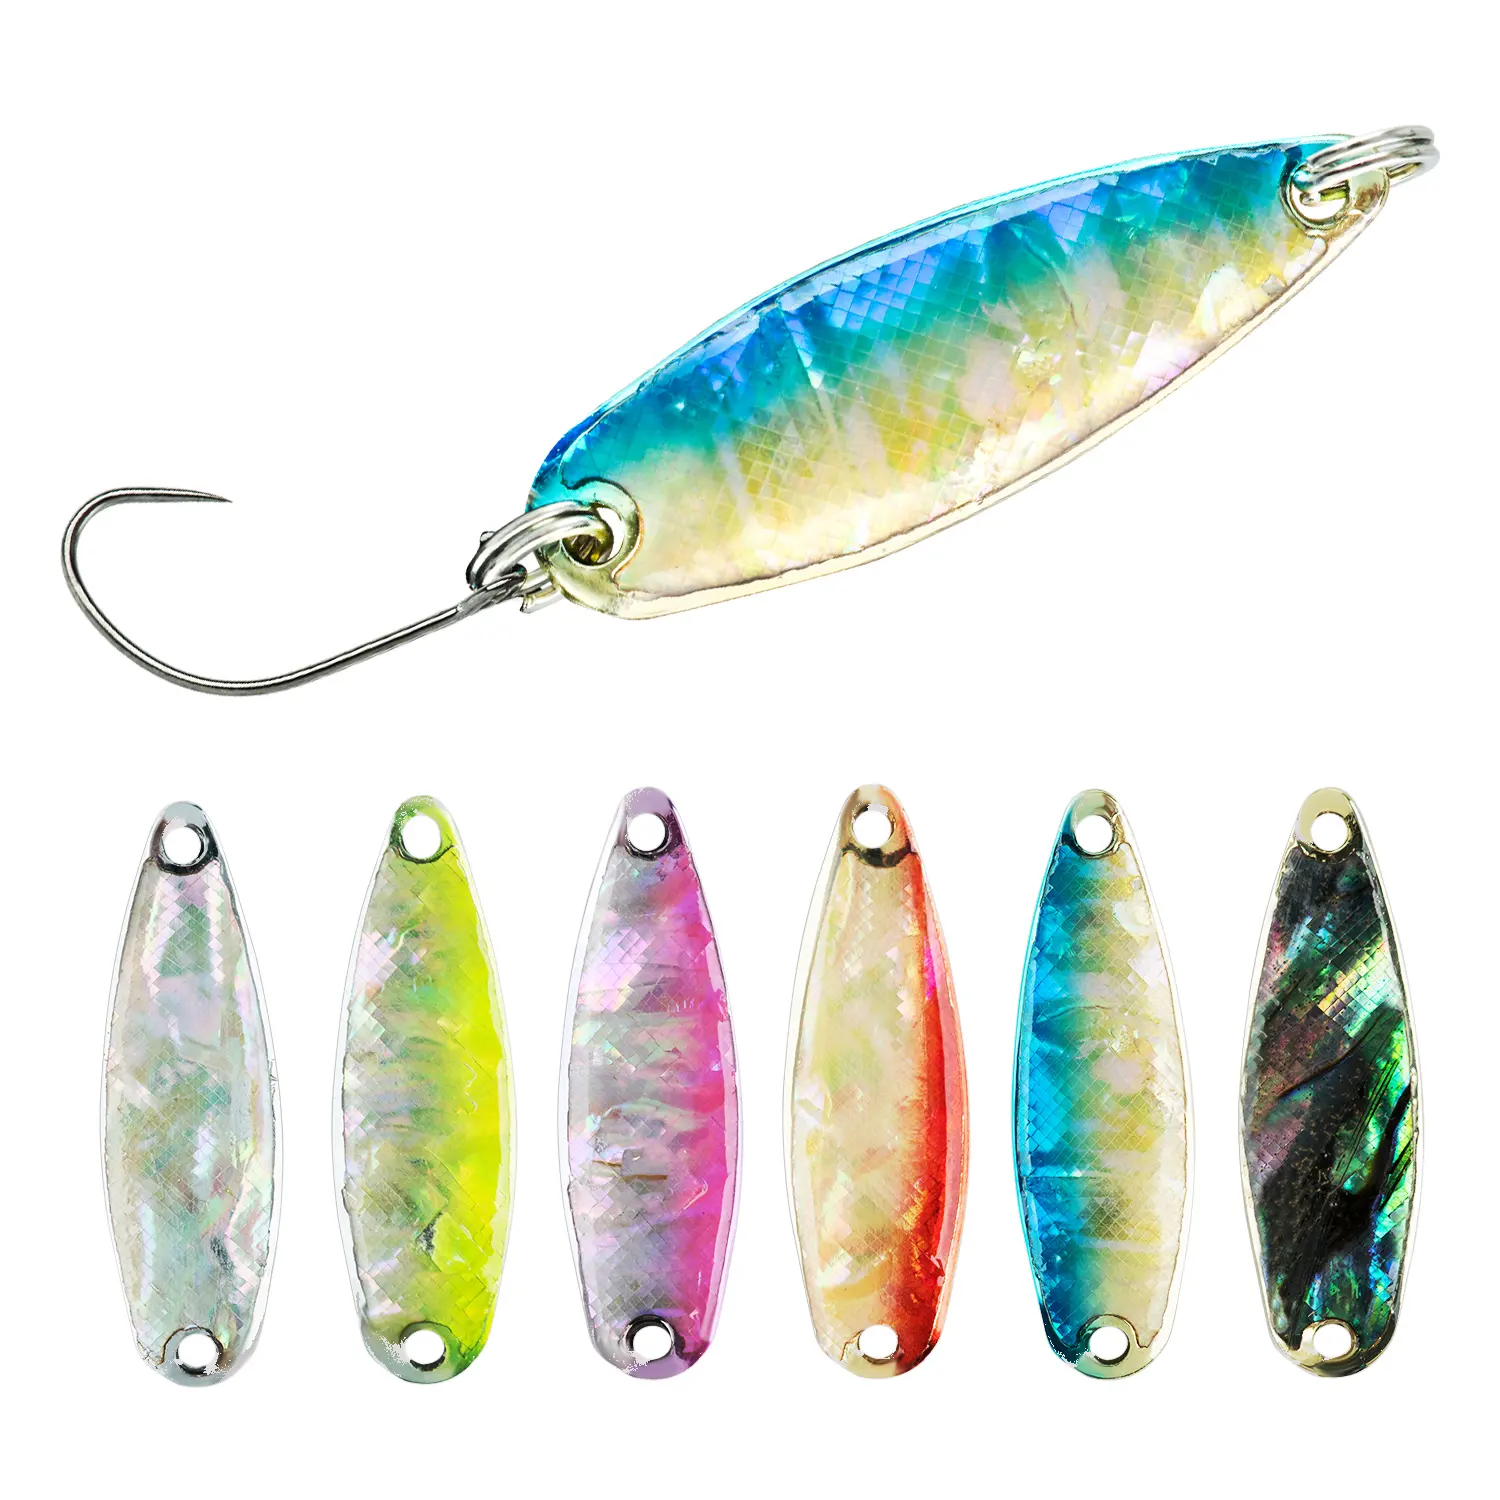 2pcs Fishing Flutter Hard Bait Freshwater Reflective Metal Spoon Lure for Trout Carp Perch